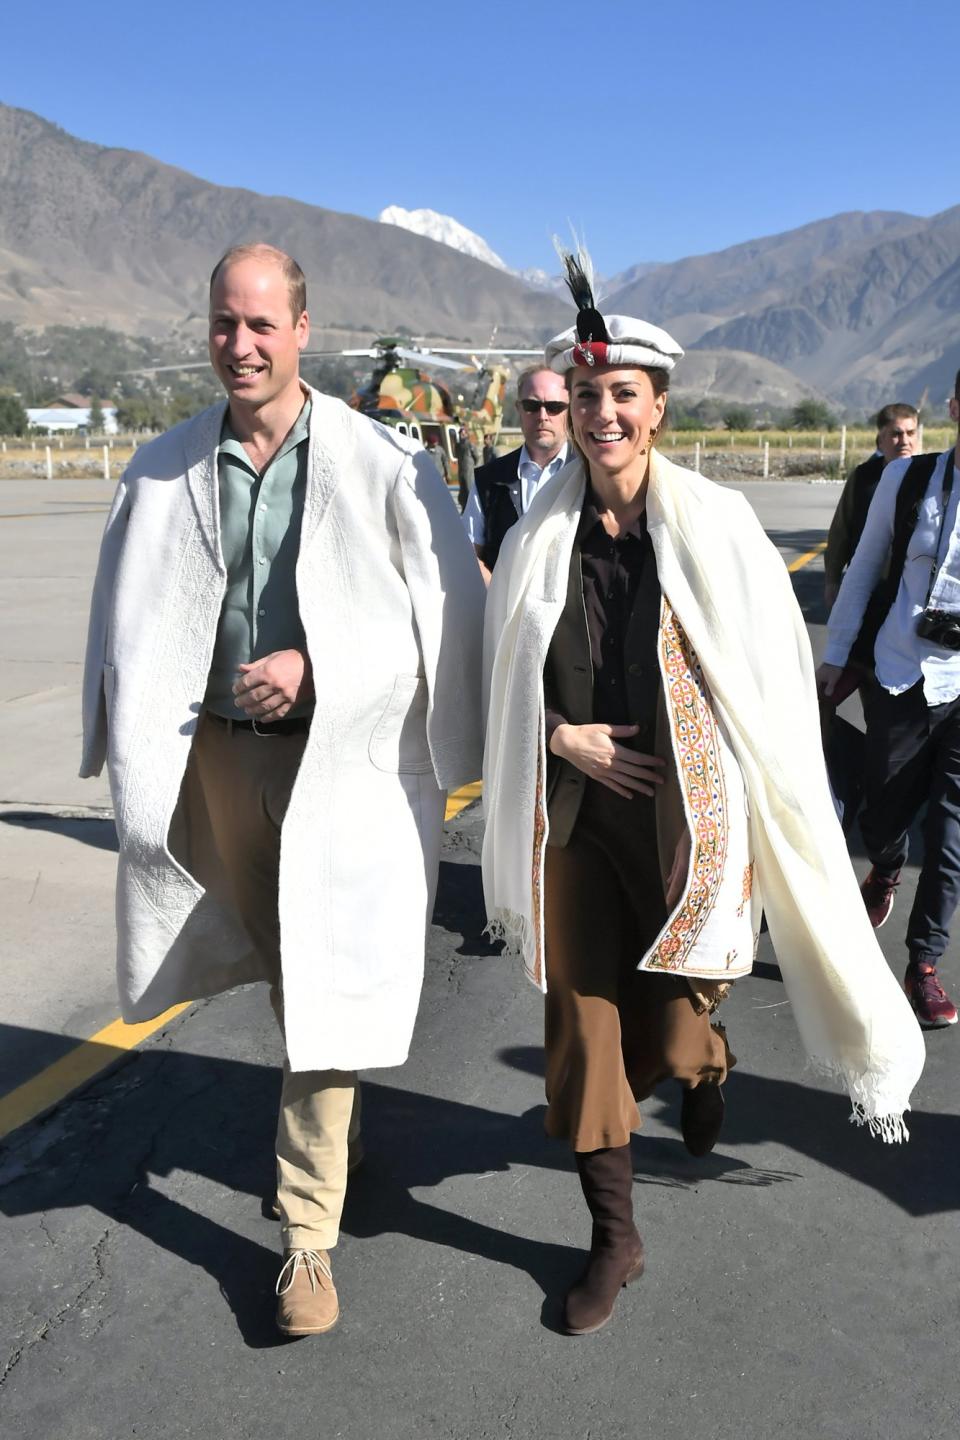 The royals headed to the mountains on Wednesday, part of their desire to see the effect that climate change and global warming are having on the local communities in the northern region of the country. Upon arrival, the royals were presented with traditional Chitrali hats as they landed in Chitral the Hindu Khush, near the Afghan border. Kate sported her traditional hat with a warm shawl and colorful embroidered jacket she was also given, which she placed over her leather vest, brown shirt tucked into a belted skirt and flat boots. William, who was given a long white embossed coat, placed his new accessory over his green button-down and slacks.